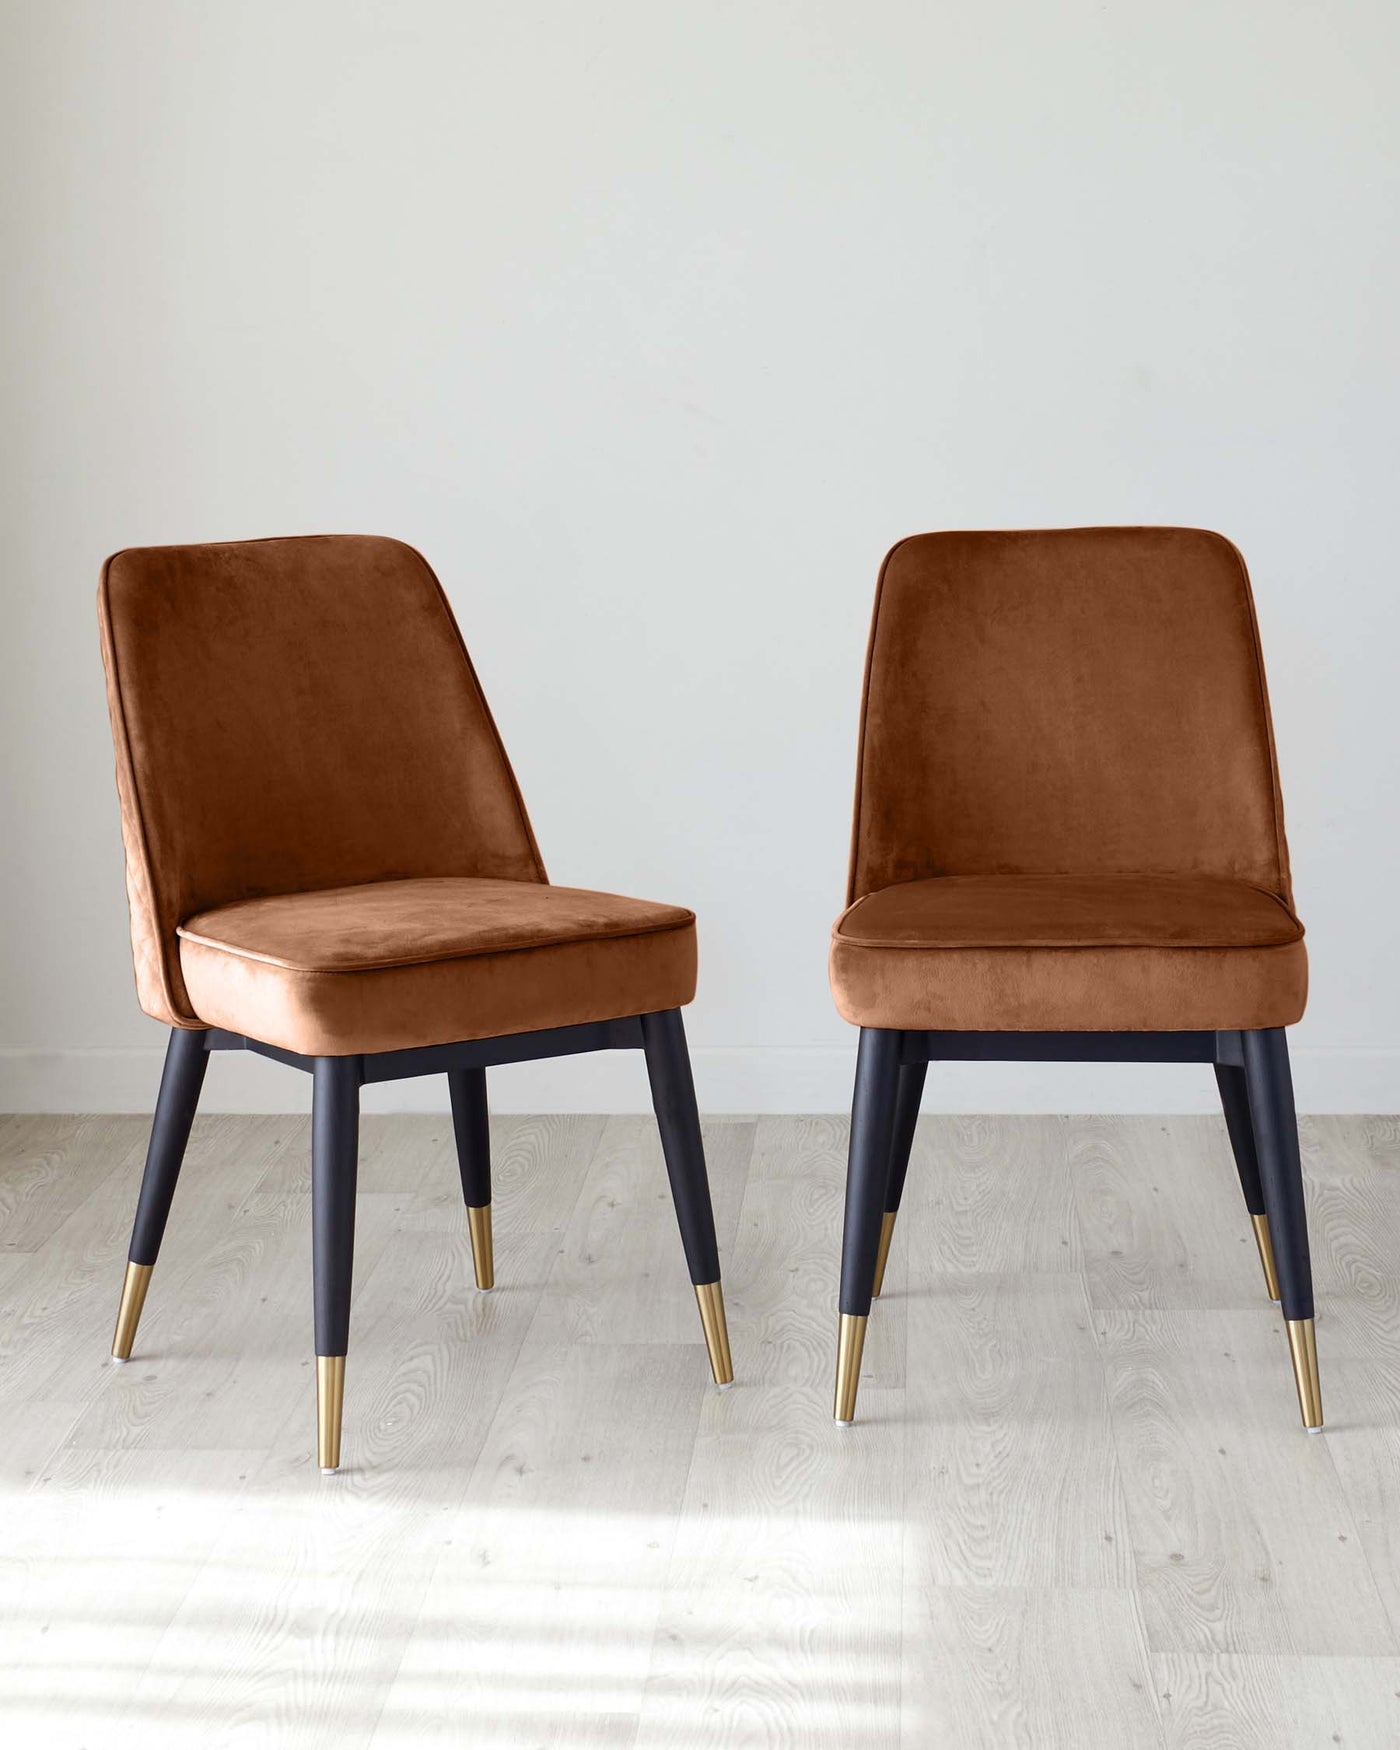 Two modern dining chairs with velvety caramel upholstery and sleek black legs tipped with gold accents, set against a simple grey background on a light wooden floor.